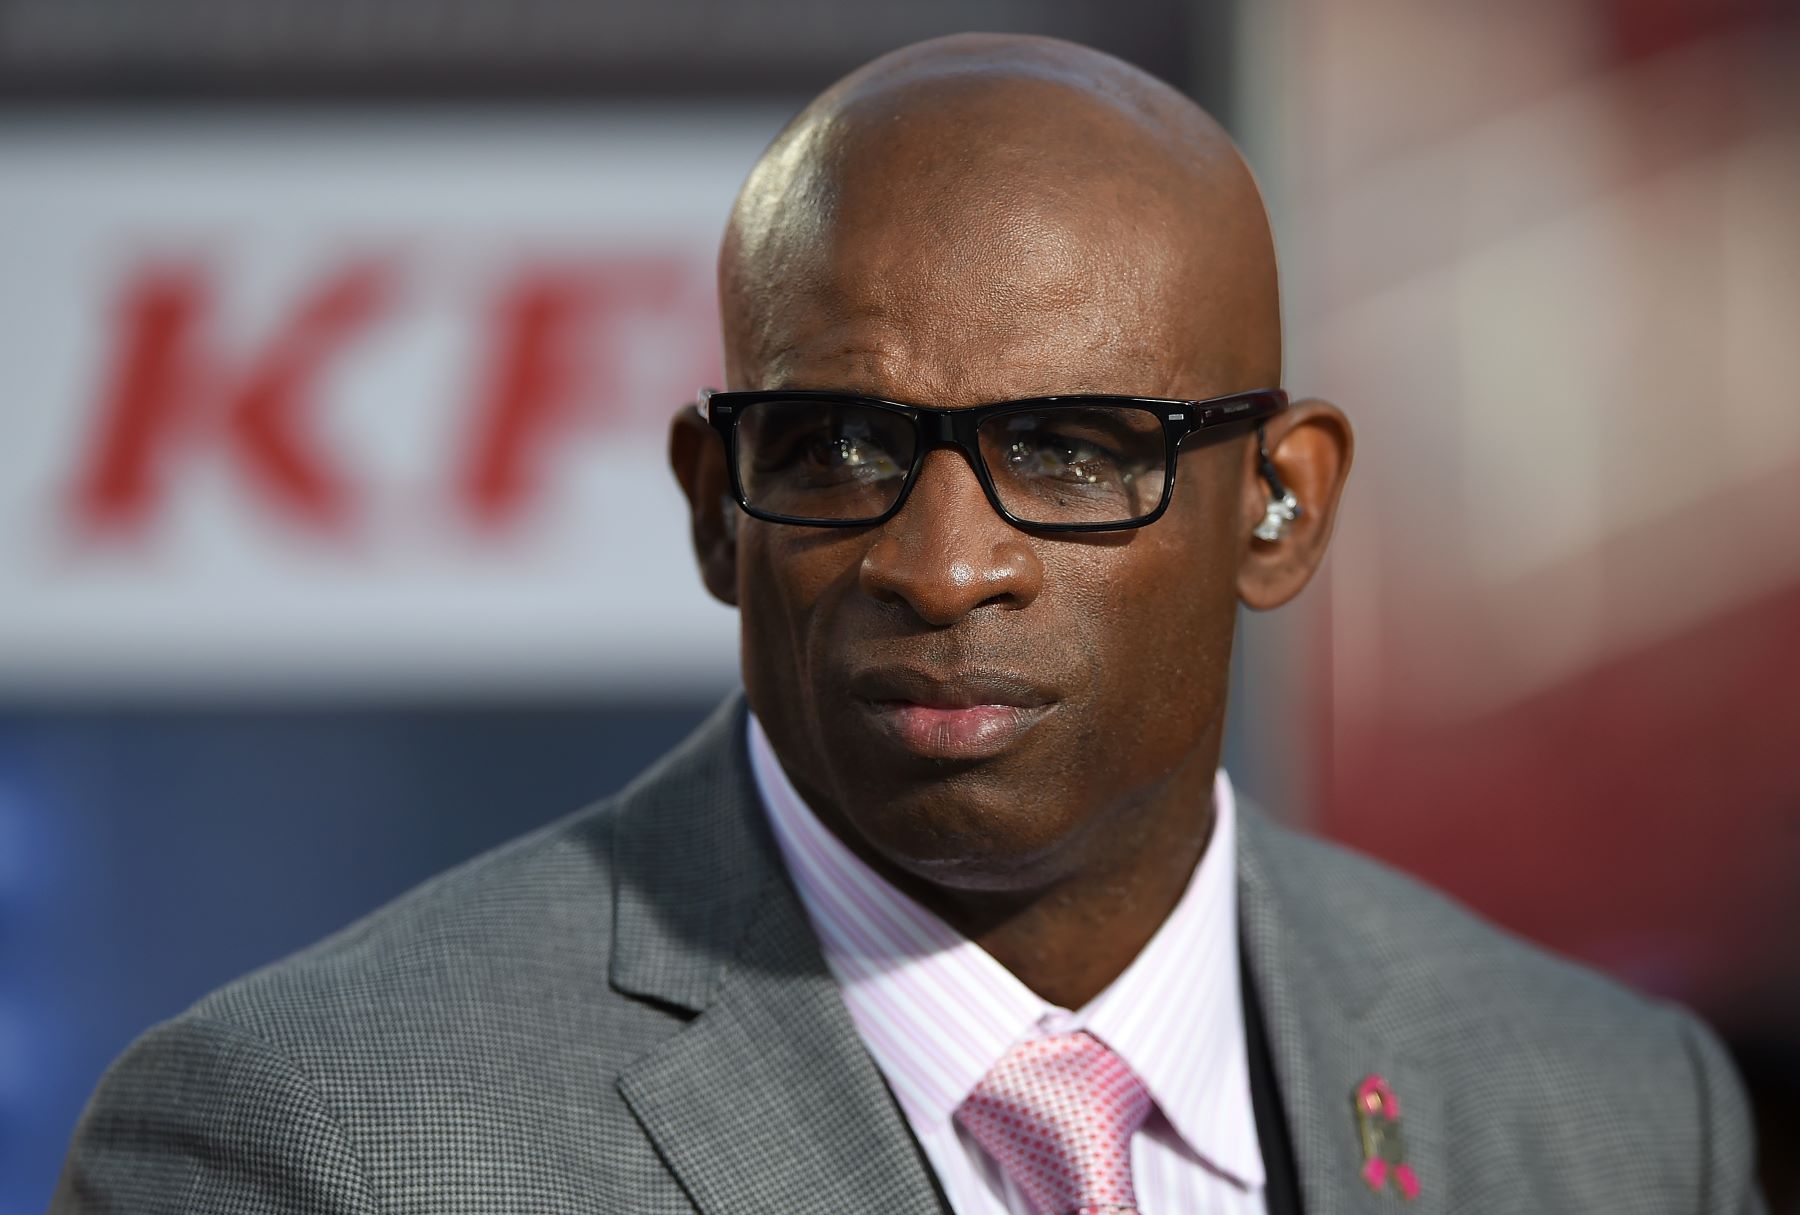 CBS Sports Analyst Deion Sanders during an NFL game between the Seattle Seahawks and the San Francisco 49ers